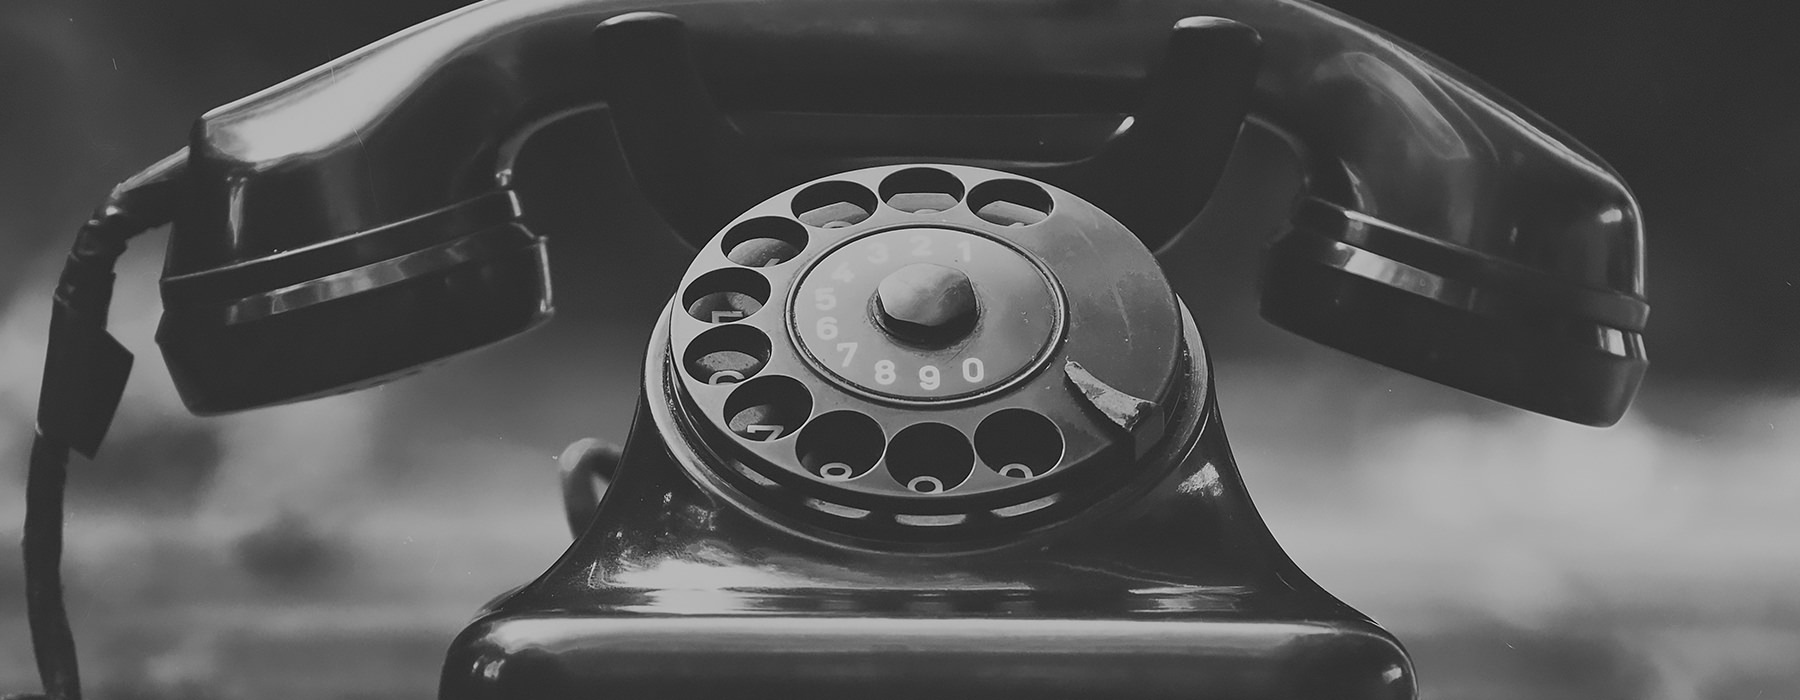 Close up of a black rotary phone